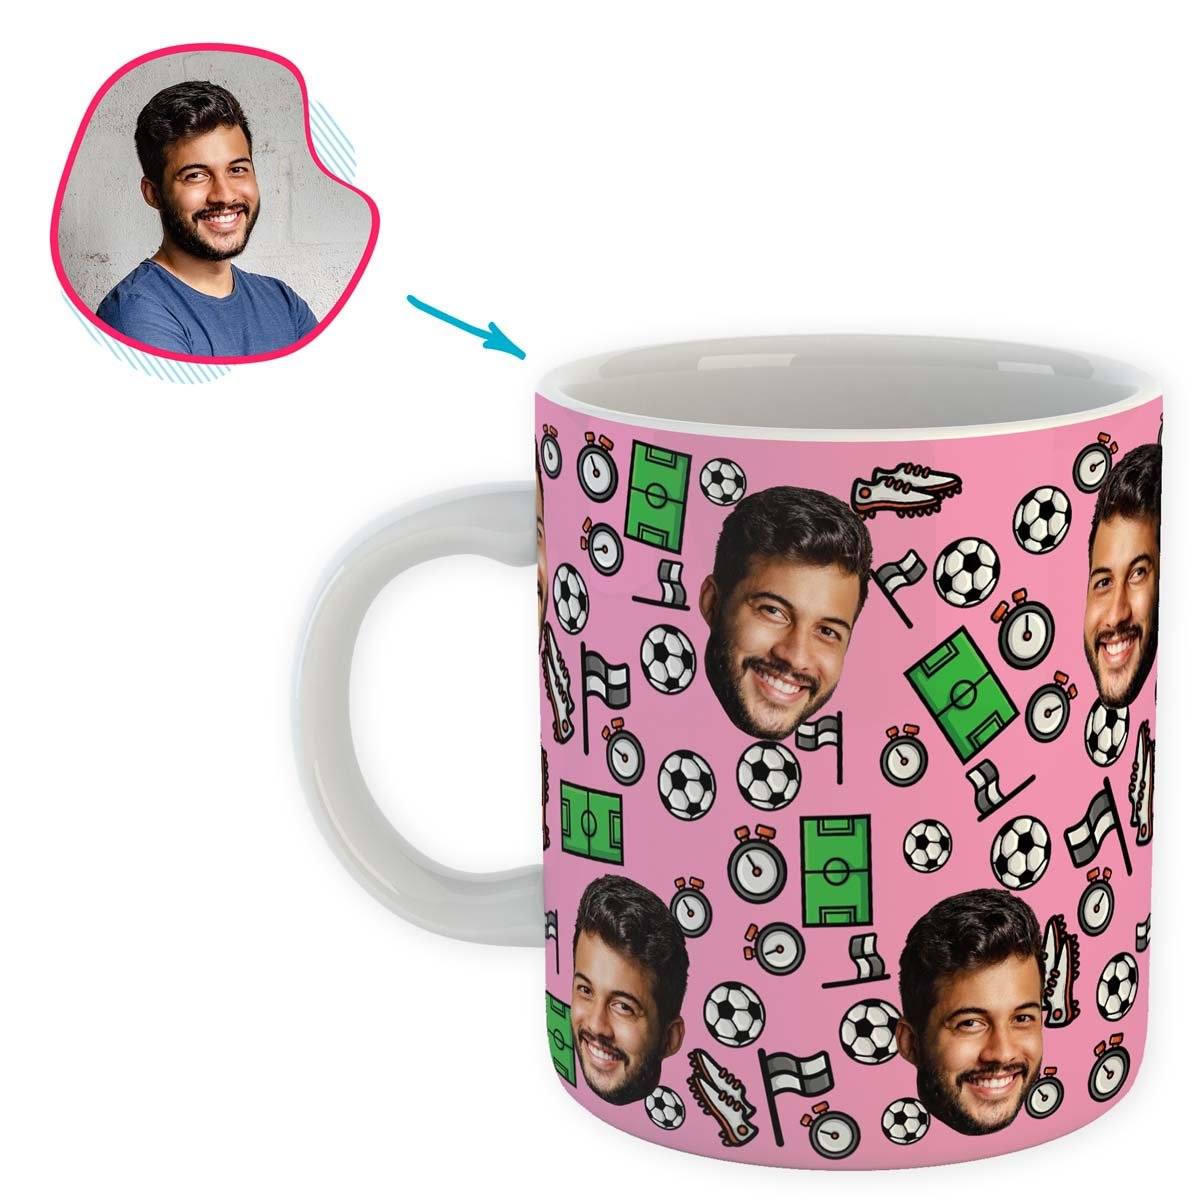 pink Football mug personalized with photo of face printed on it